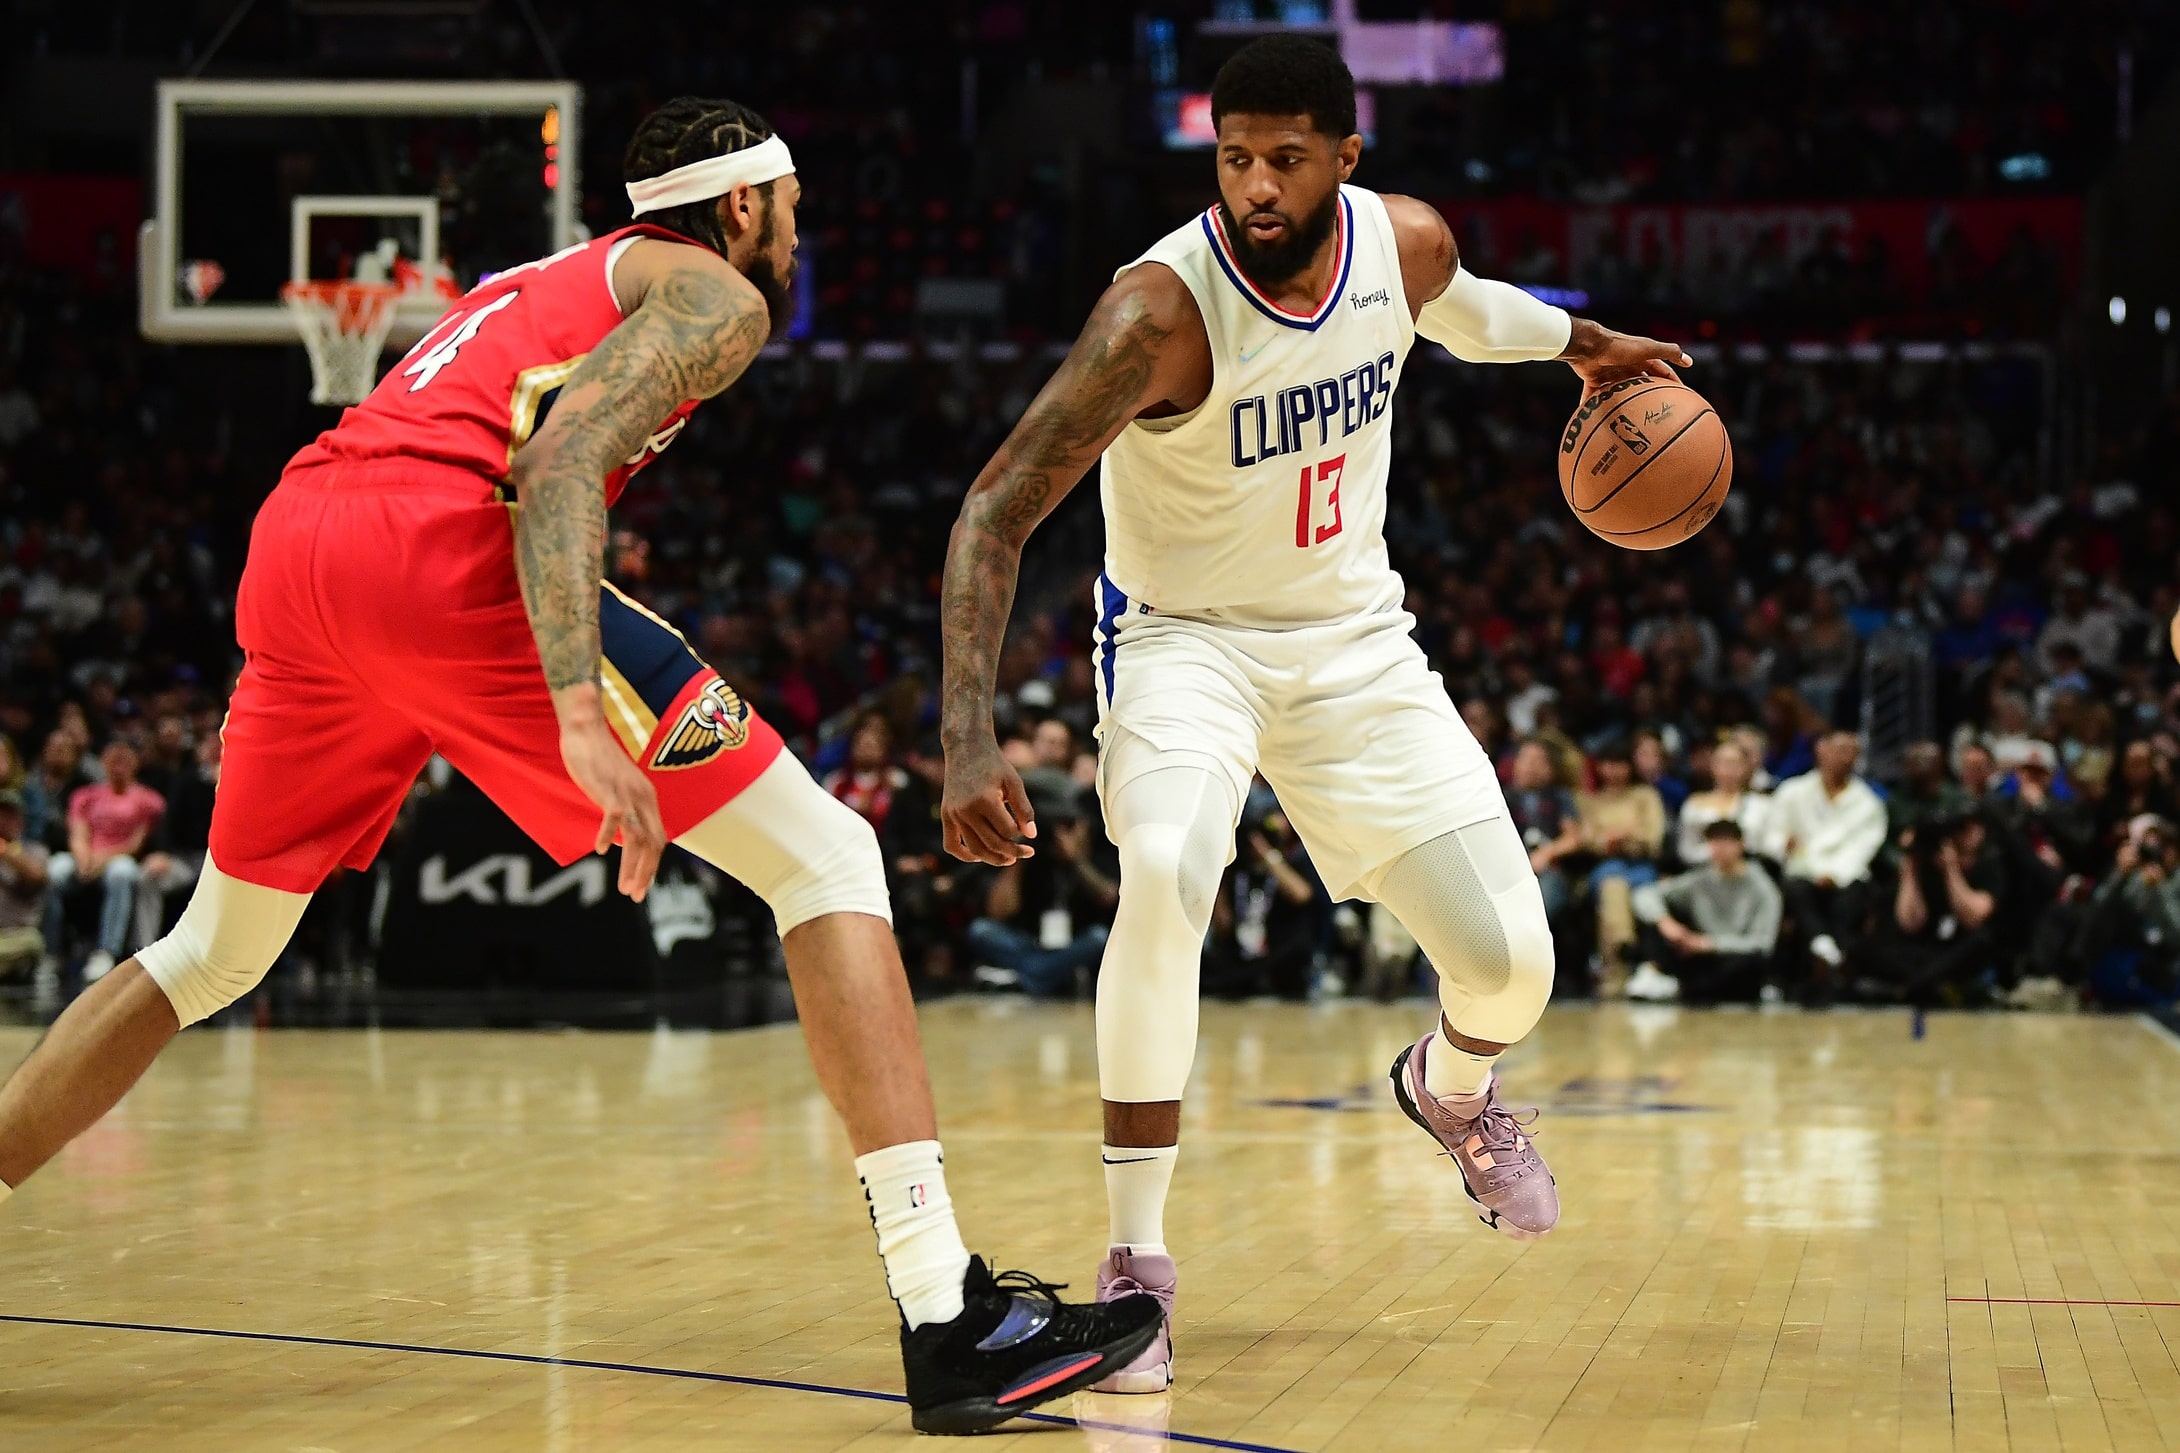 Los Angeles Clippers guard Paul George (13) controls the ball against New Orleans Pelicans forward Brandon Ingram (14) during the second half at Crypto.com Arena.